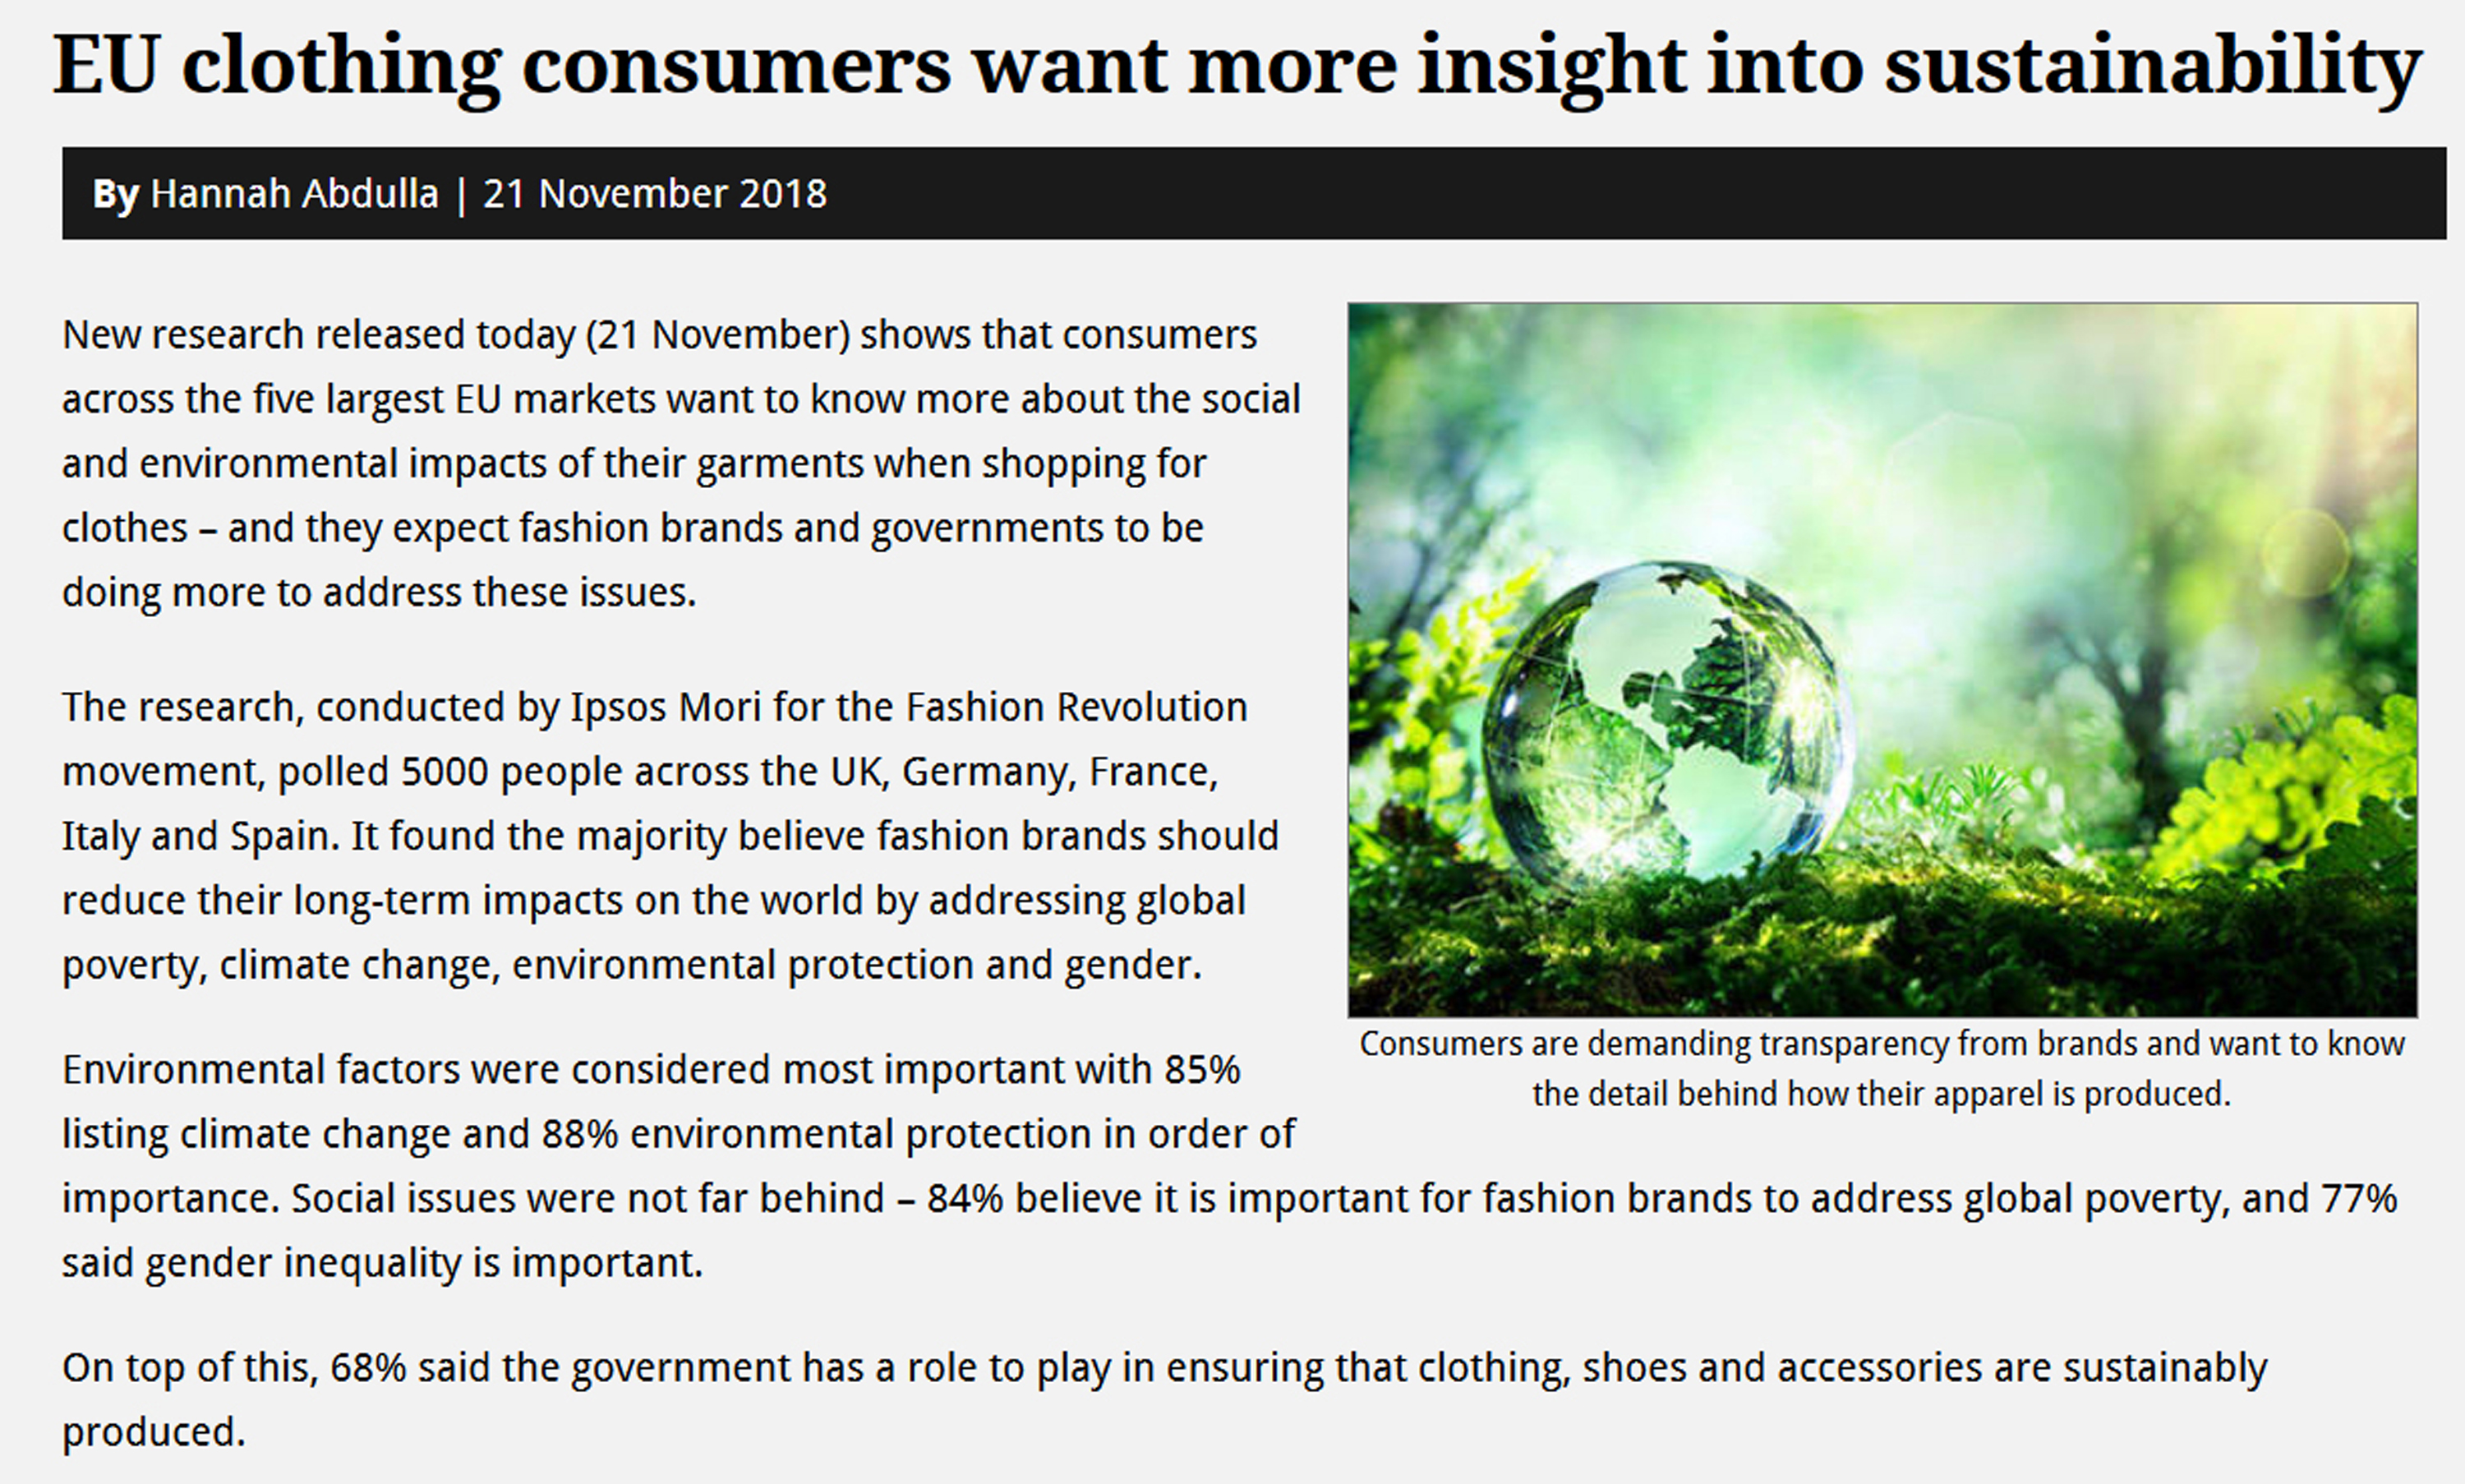 Consumers are increasingly aware on sustainability issues of the garments they wear